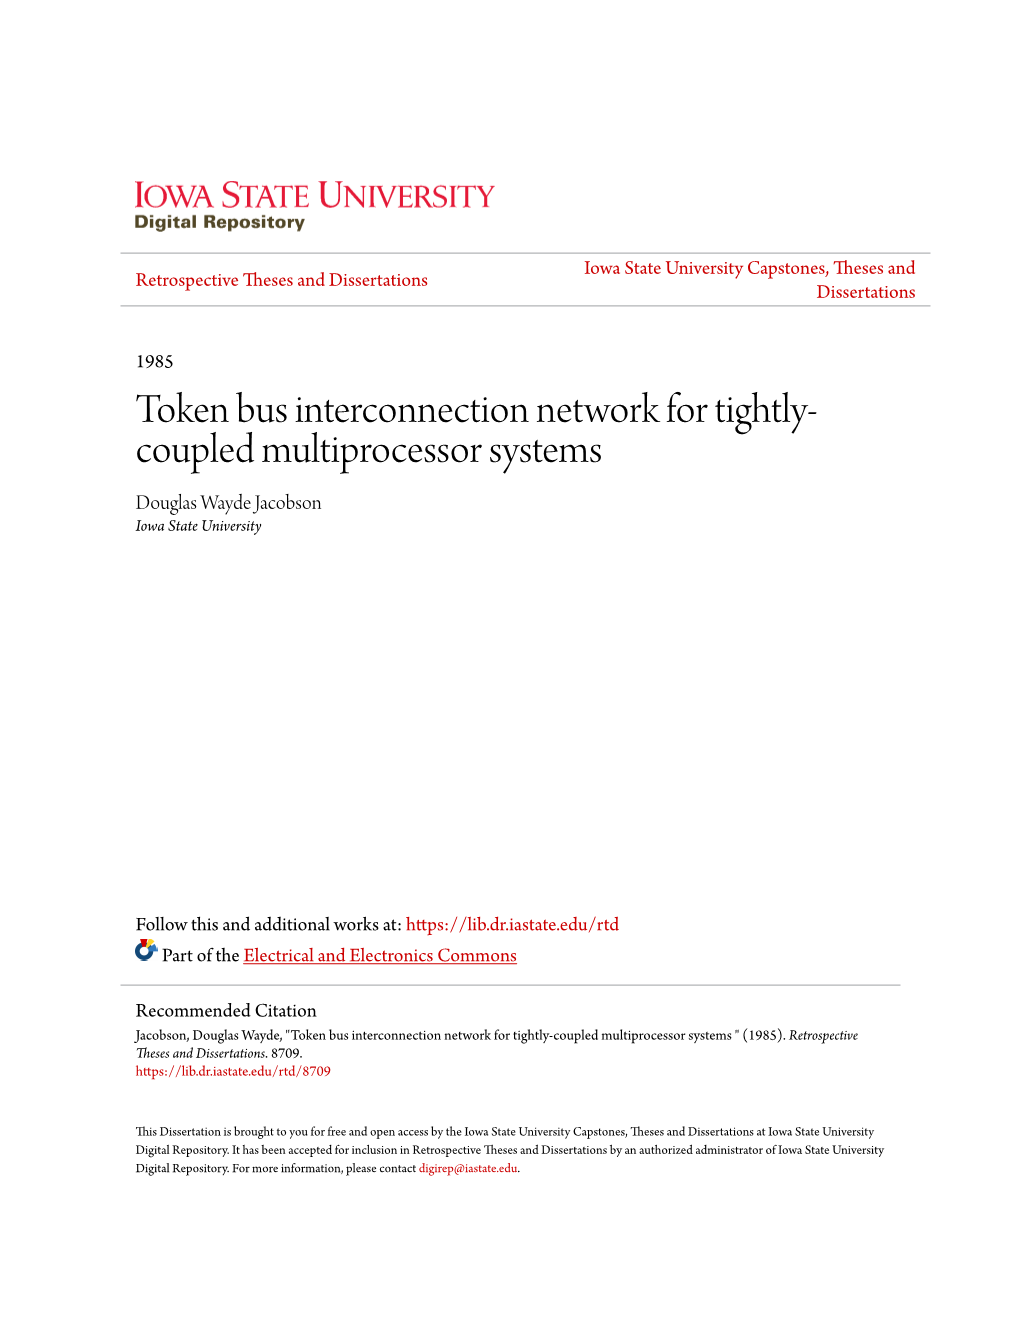 Token Bus Interconnection Network for Tightly-Coupled Multiprocessor Systems " (1985)